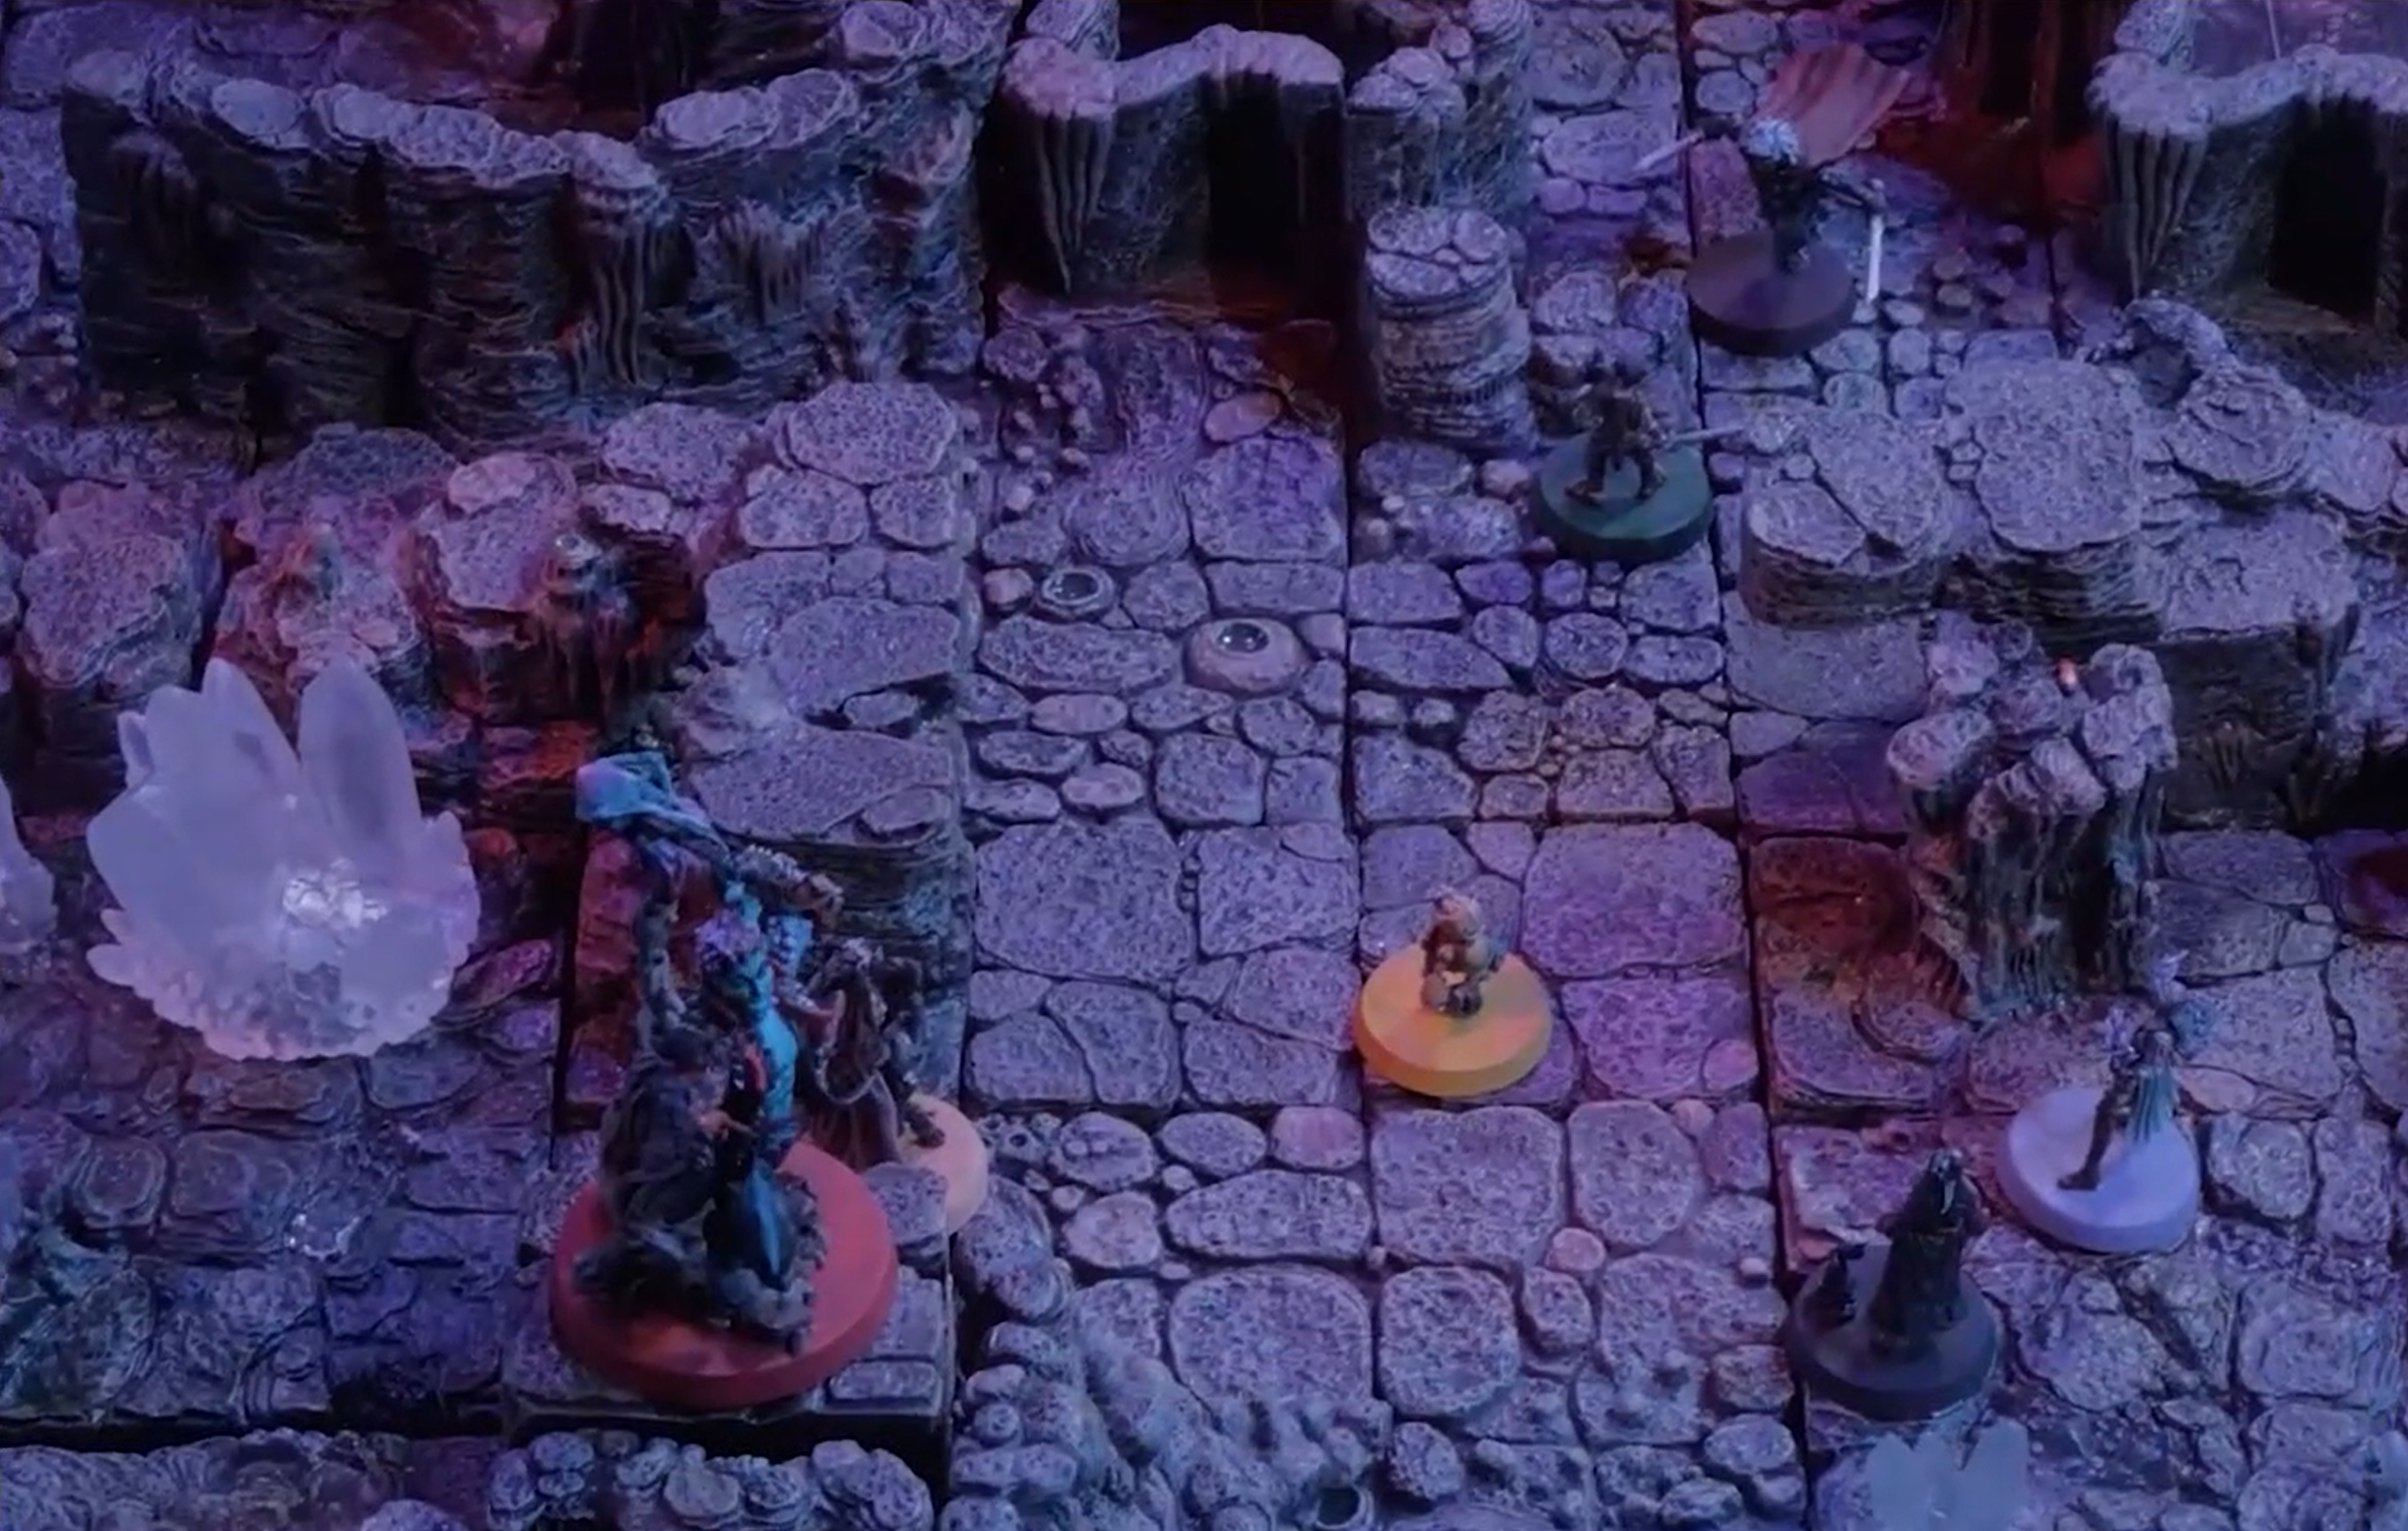 A battlemap of a cave chamber scattered with collections of cloudy white crystals. Ashton, Imogen, Laudna, Orym, Fearne, and FCG are standing in frame, with Otohan facing Orym.